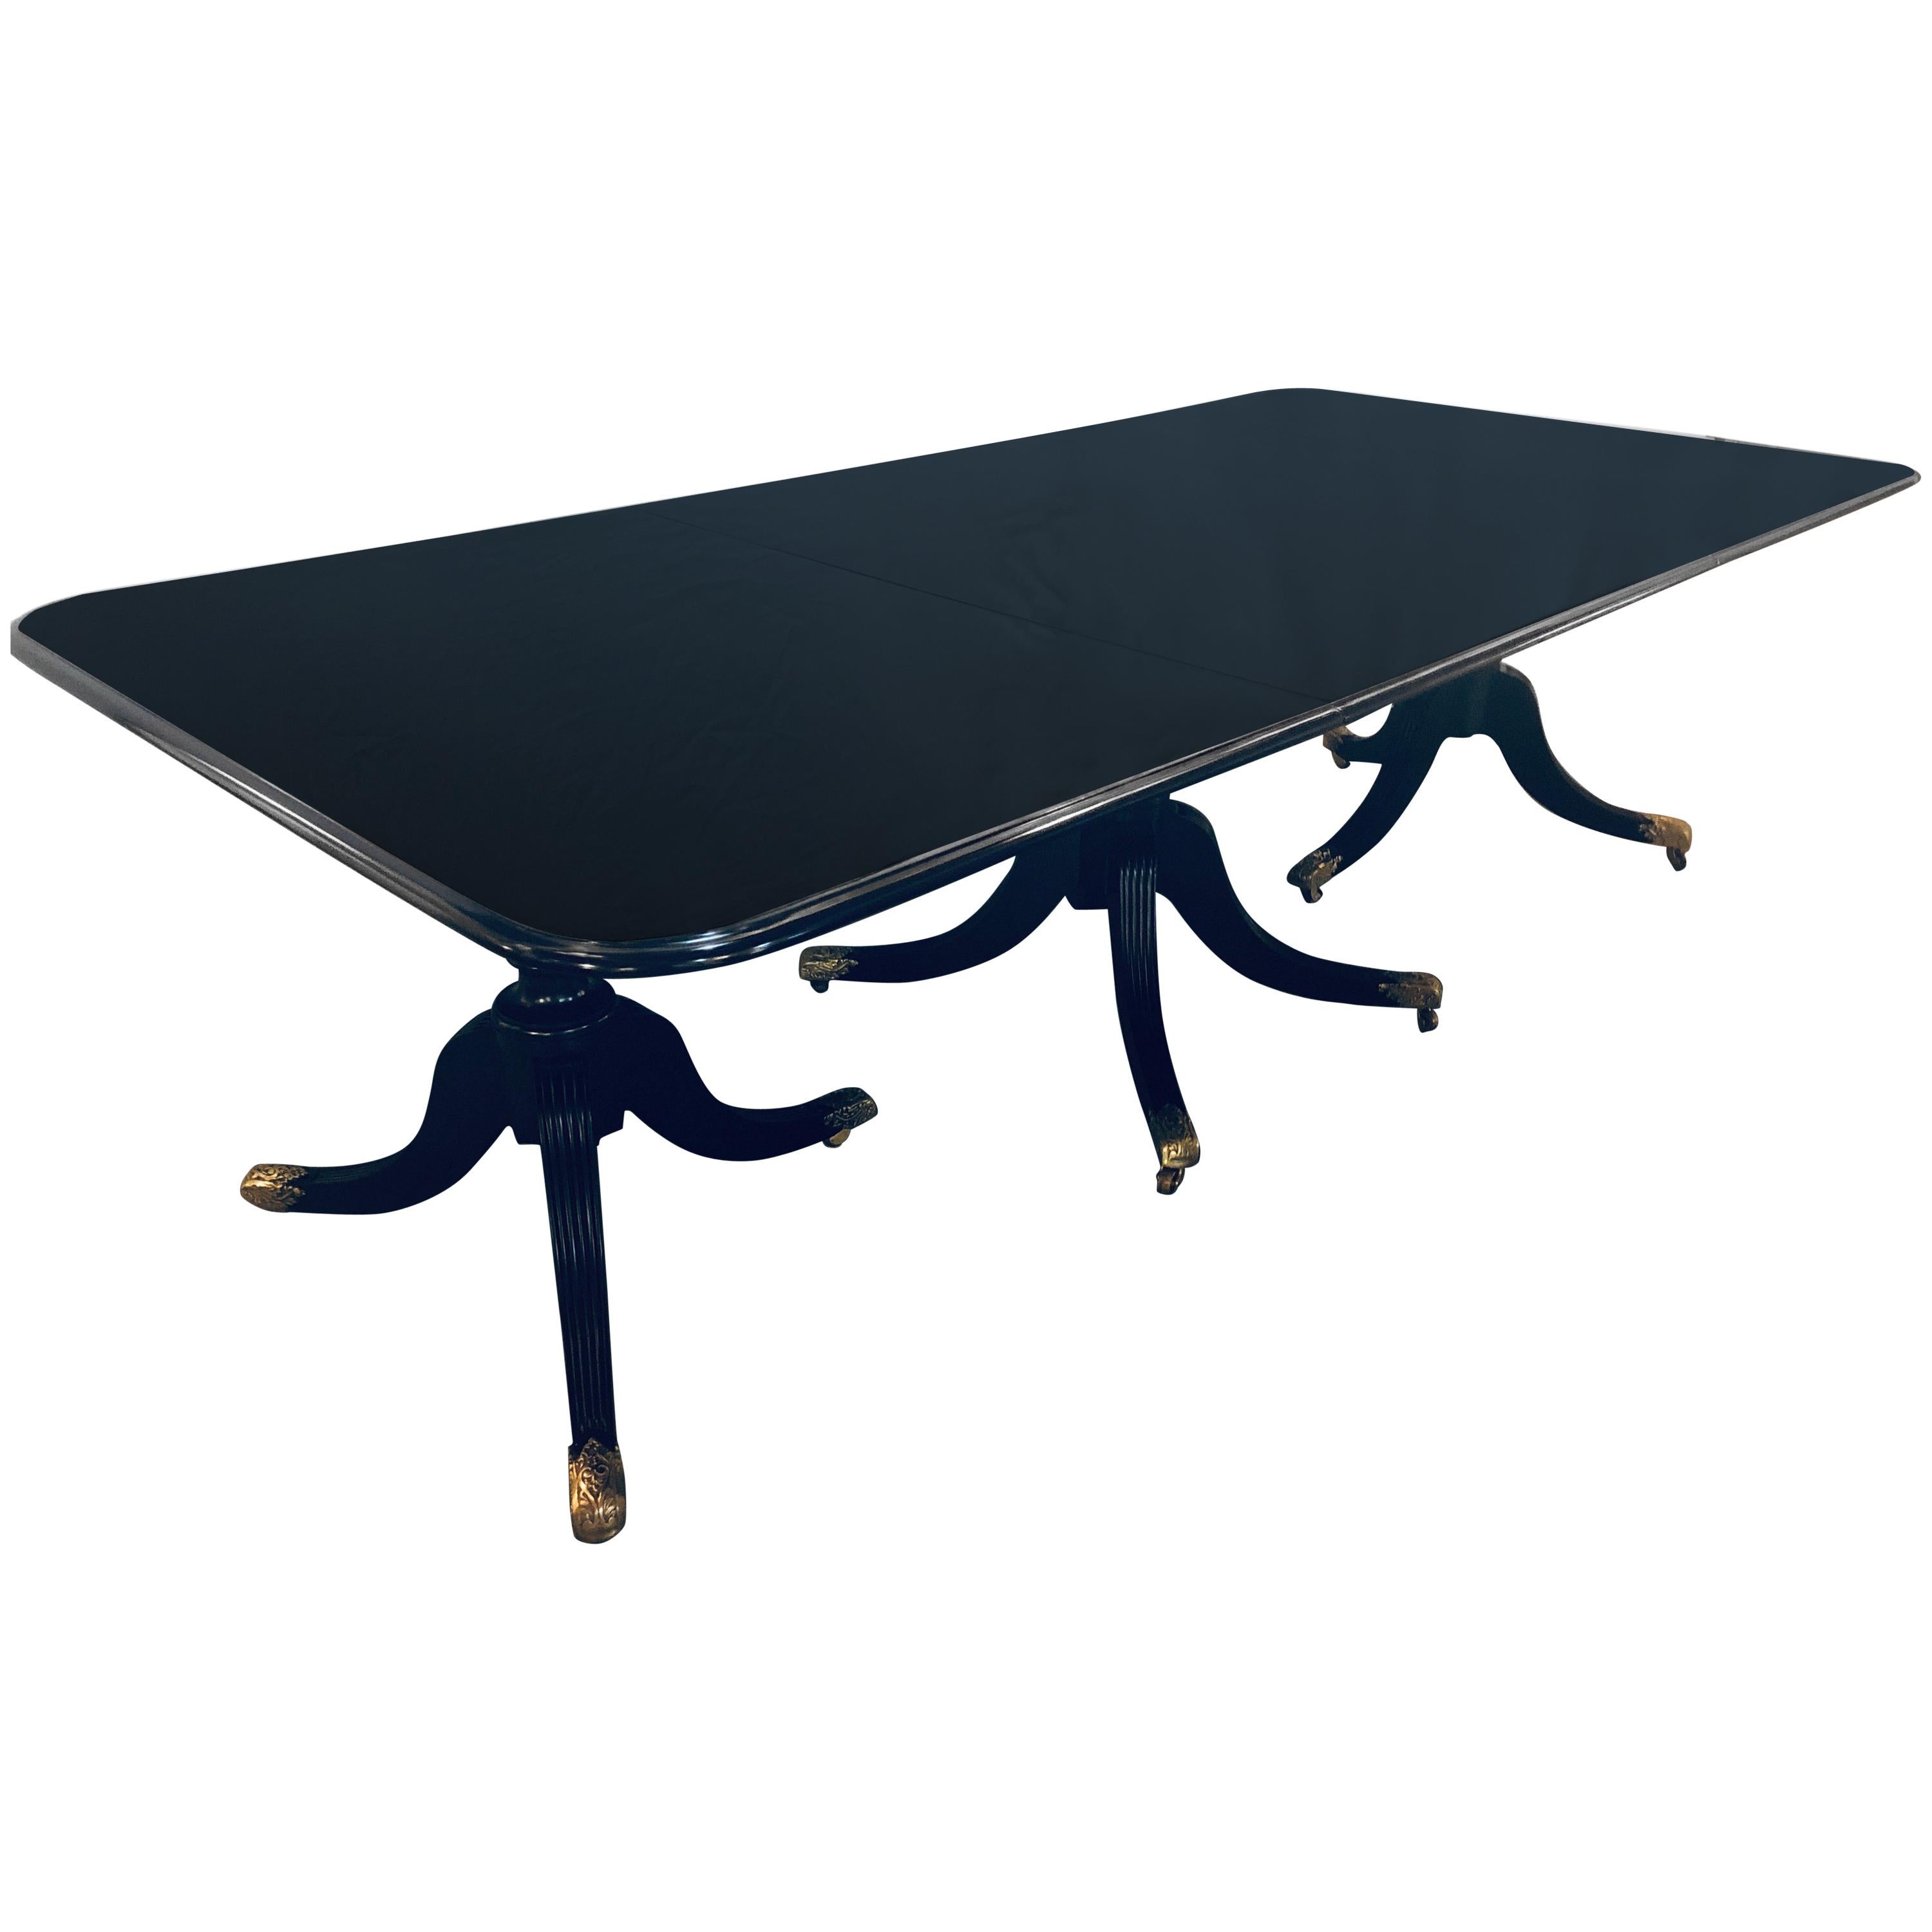 Triple Pedestal circa 1920s Ebony Dining Table in the Manner of Maison Jansen